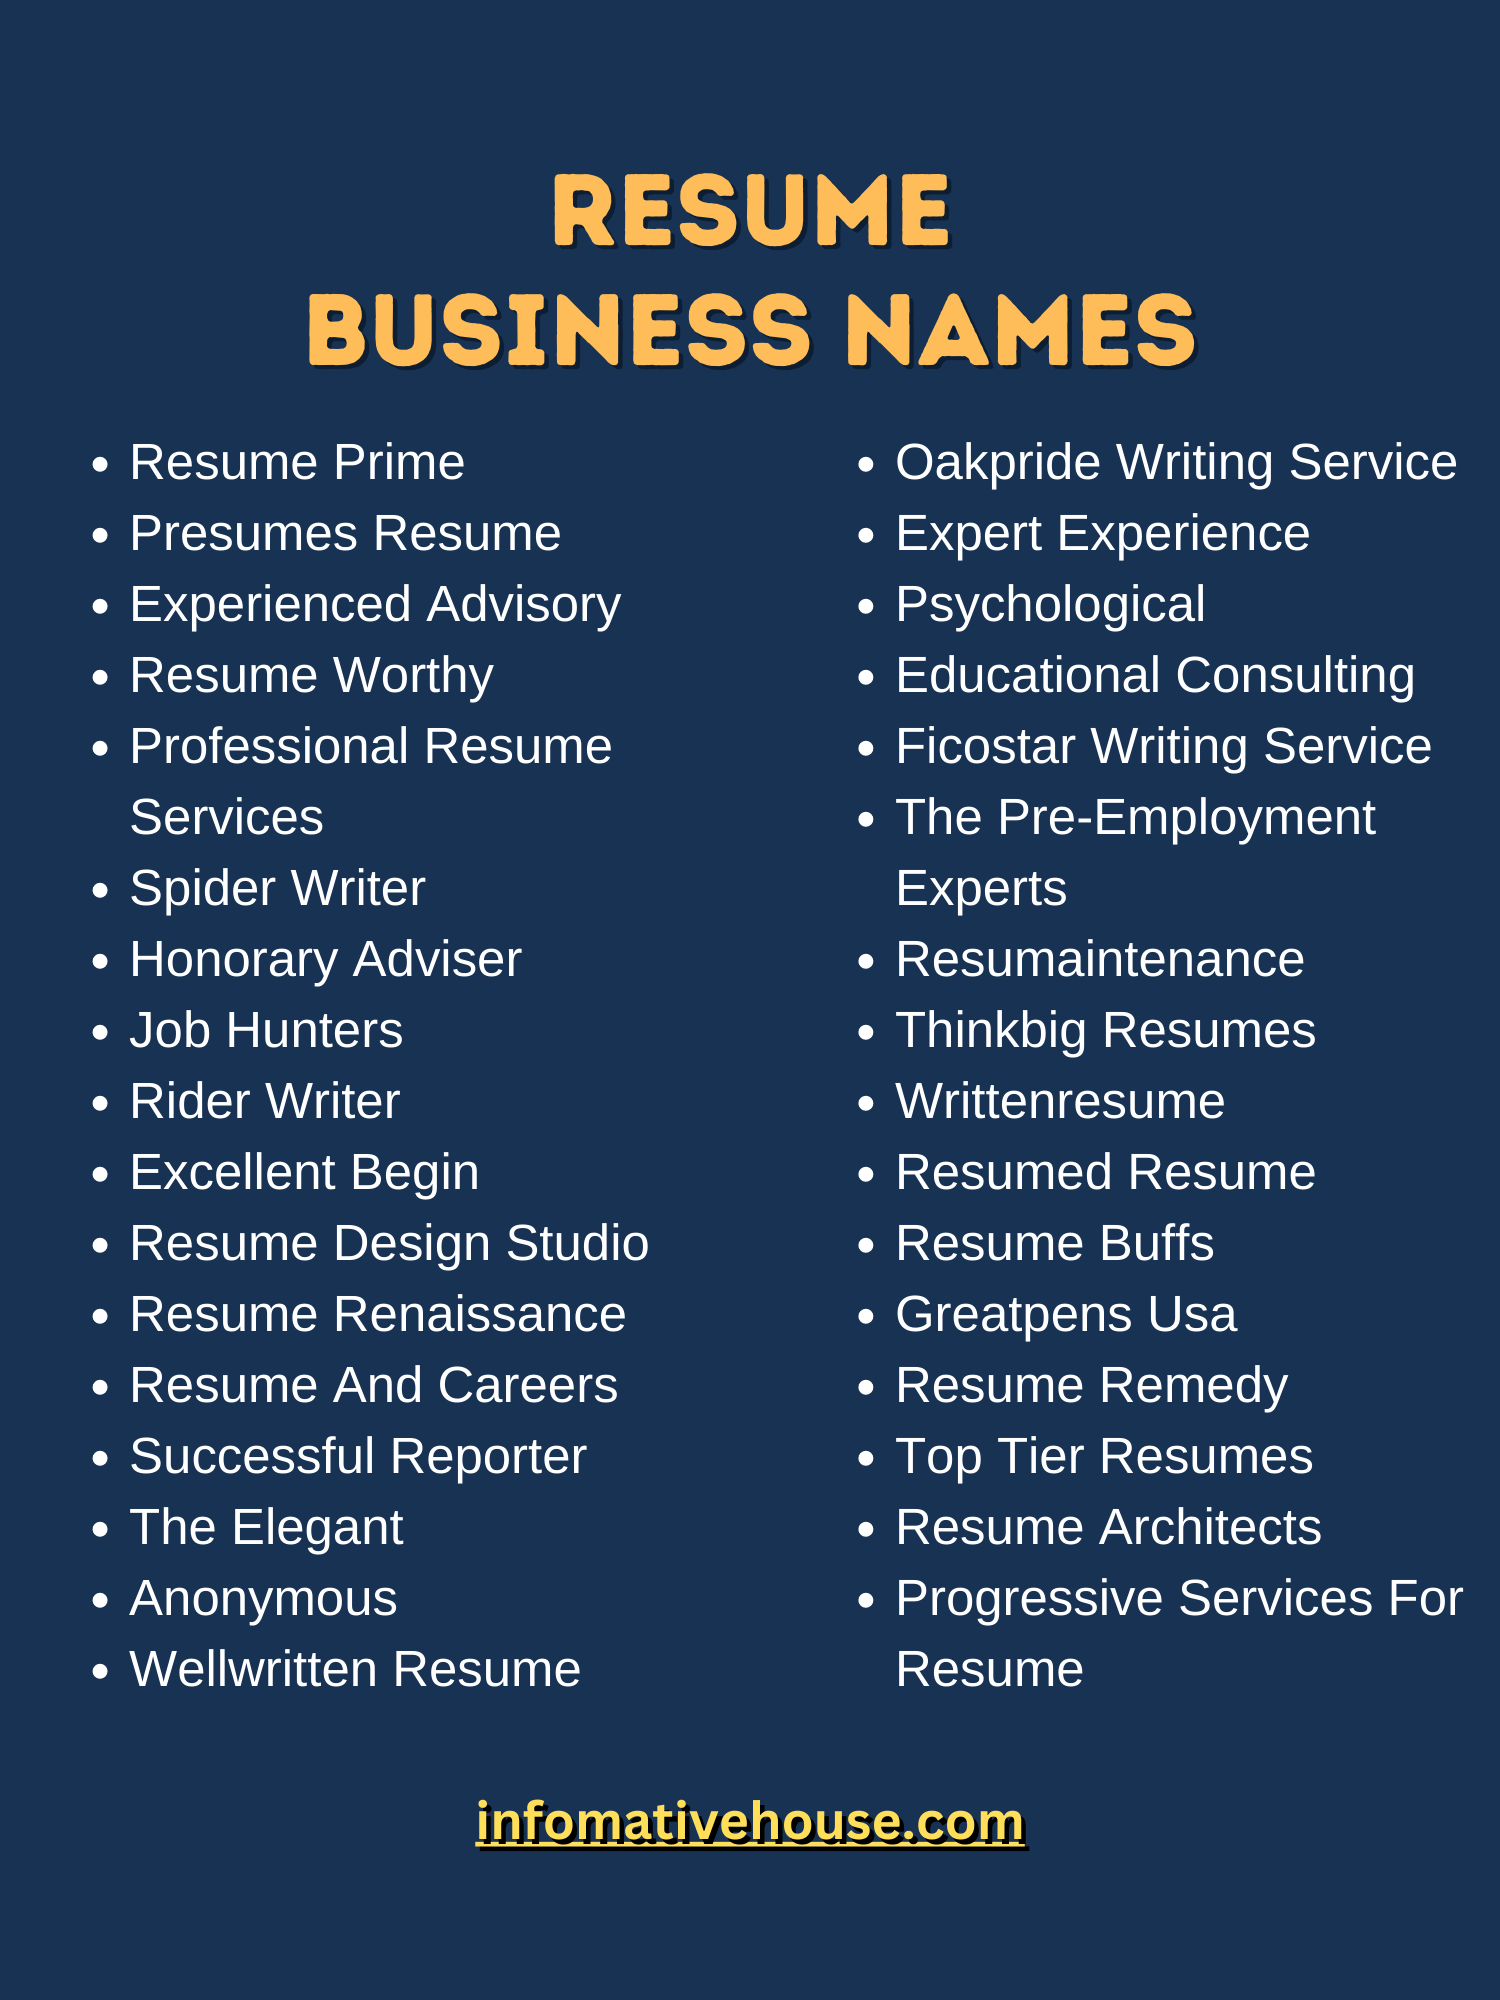 resume writing business names